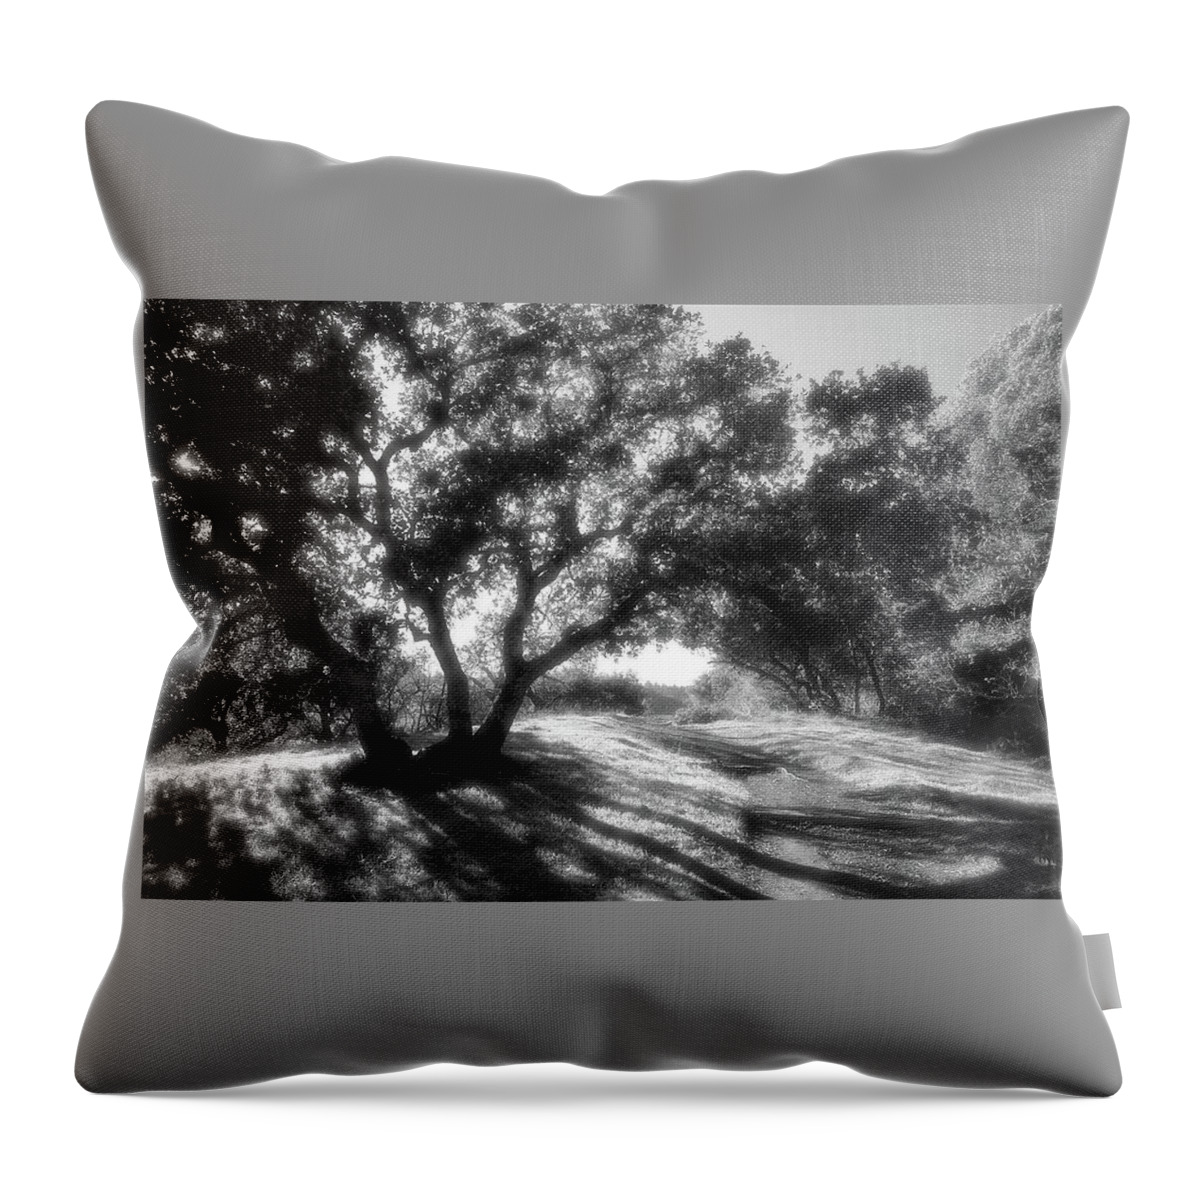 Five Points Throw Pillow featuring the photograph Five Points Fairfax by John Parulis